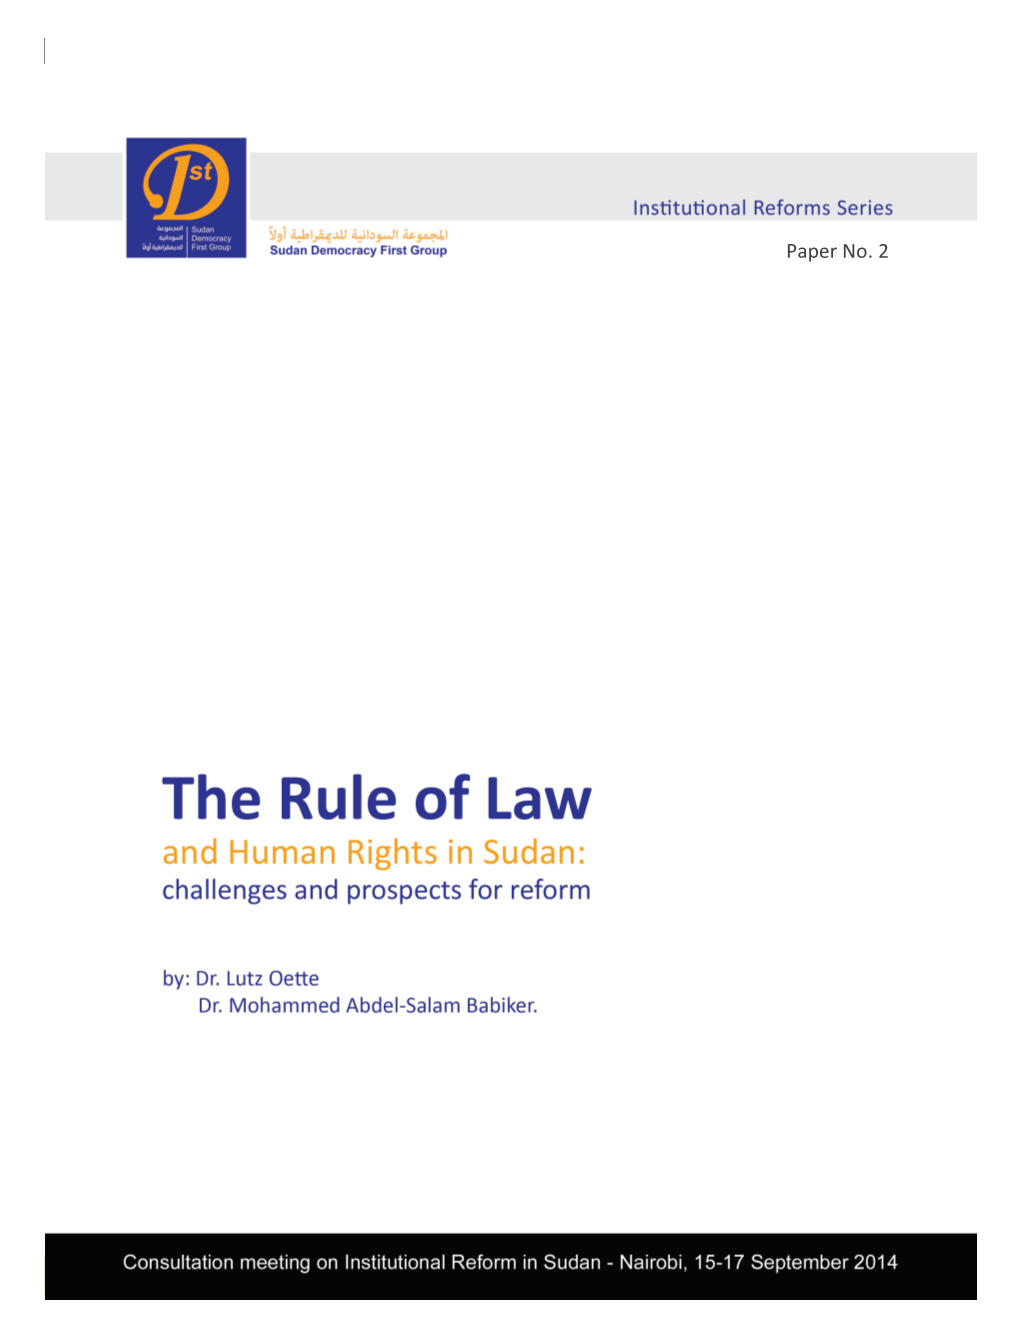 The Rule of Law and Human Rights in Sudan: Challenges and Prospects for Reform